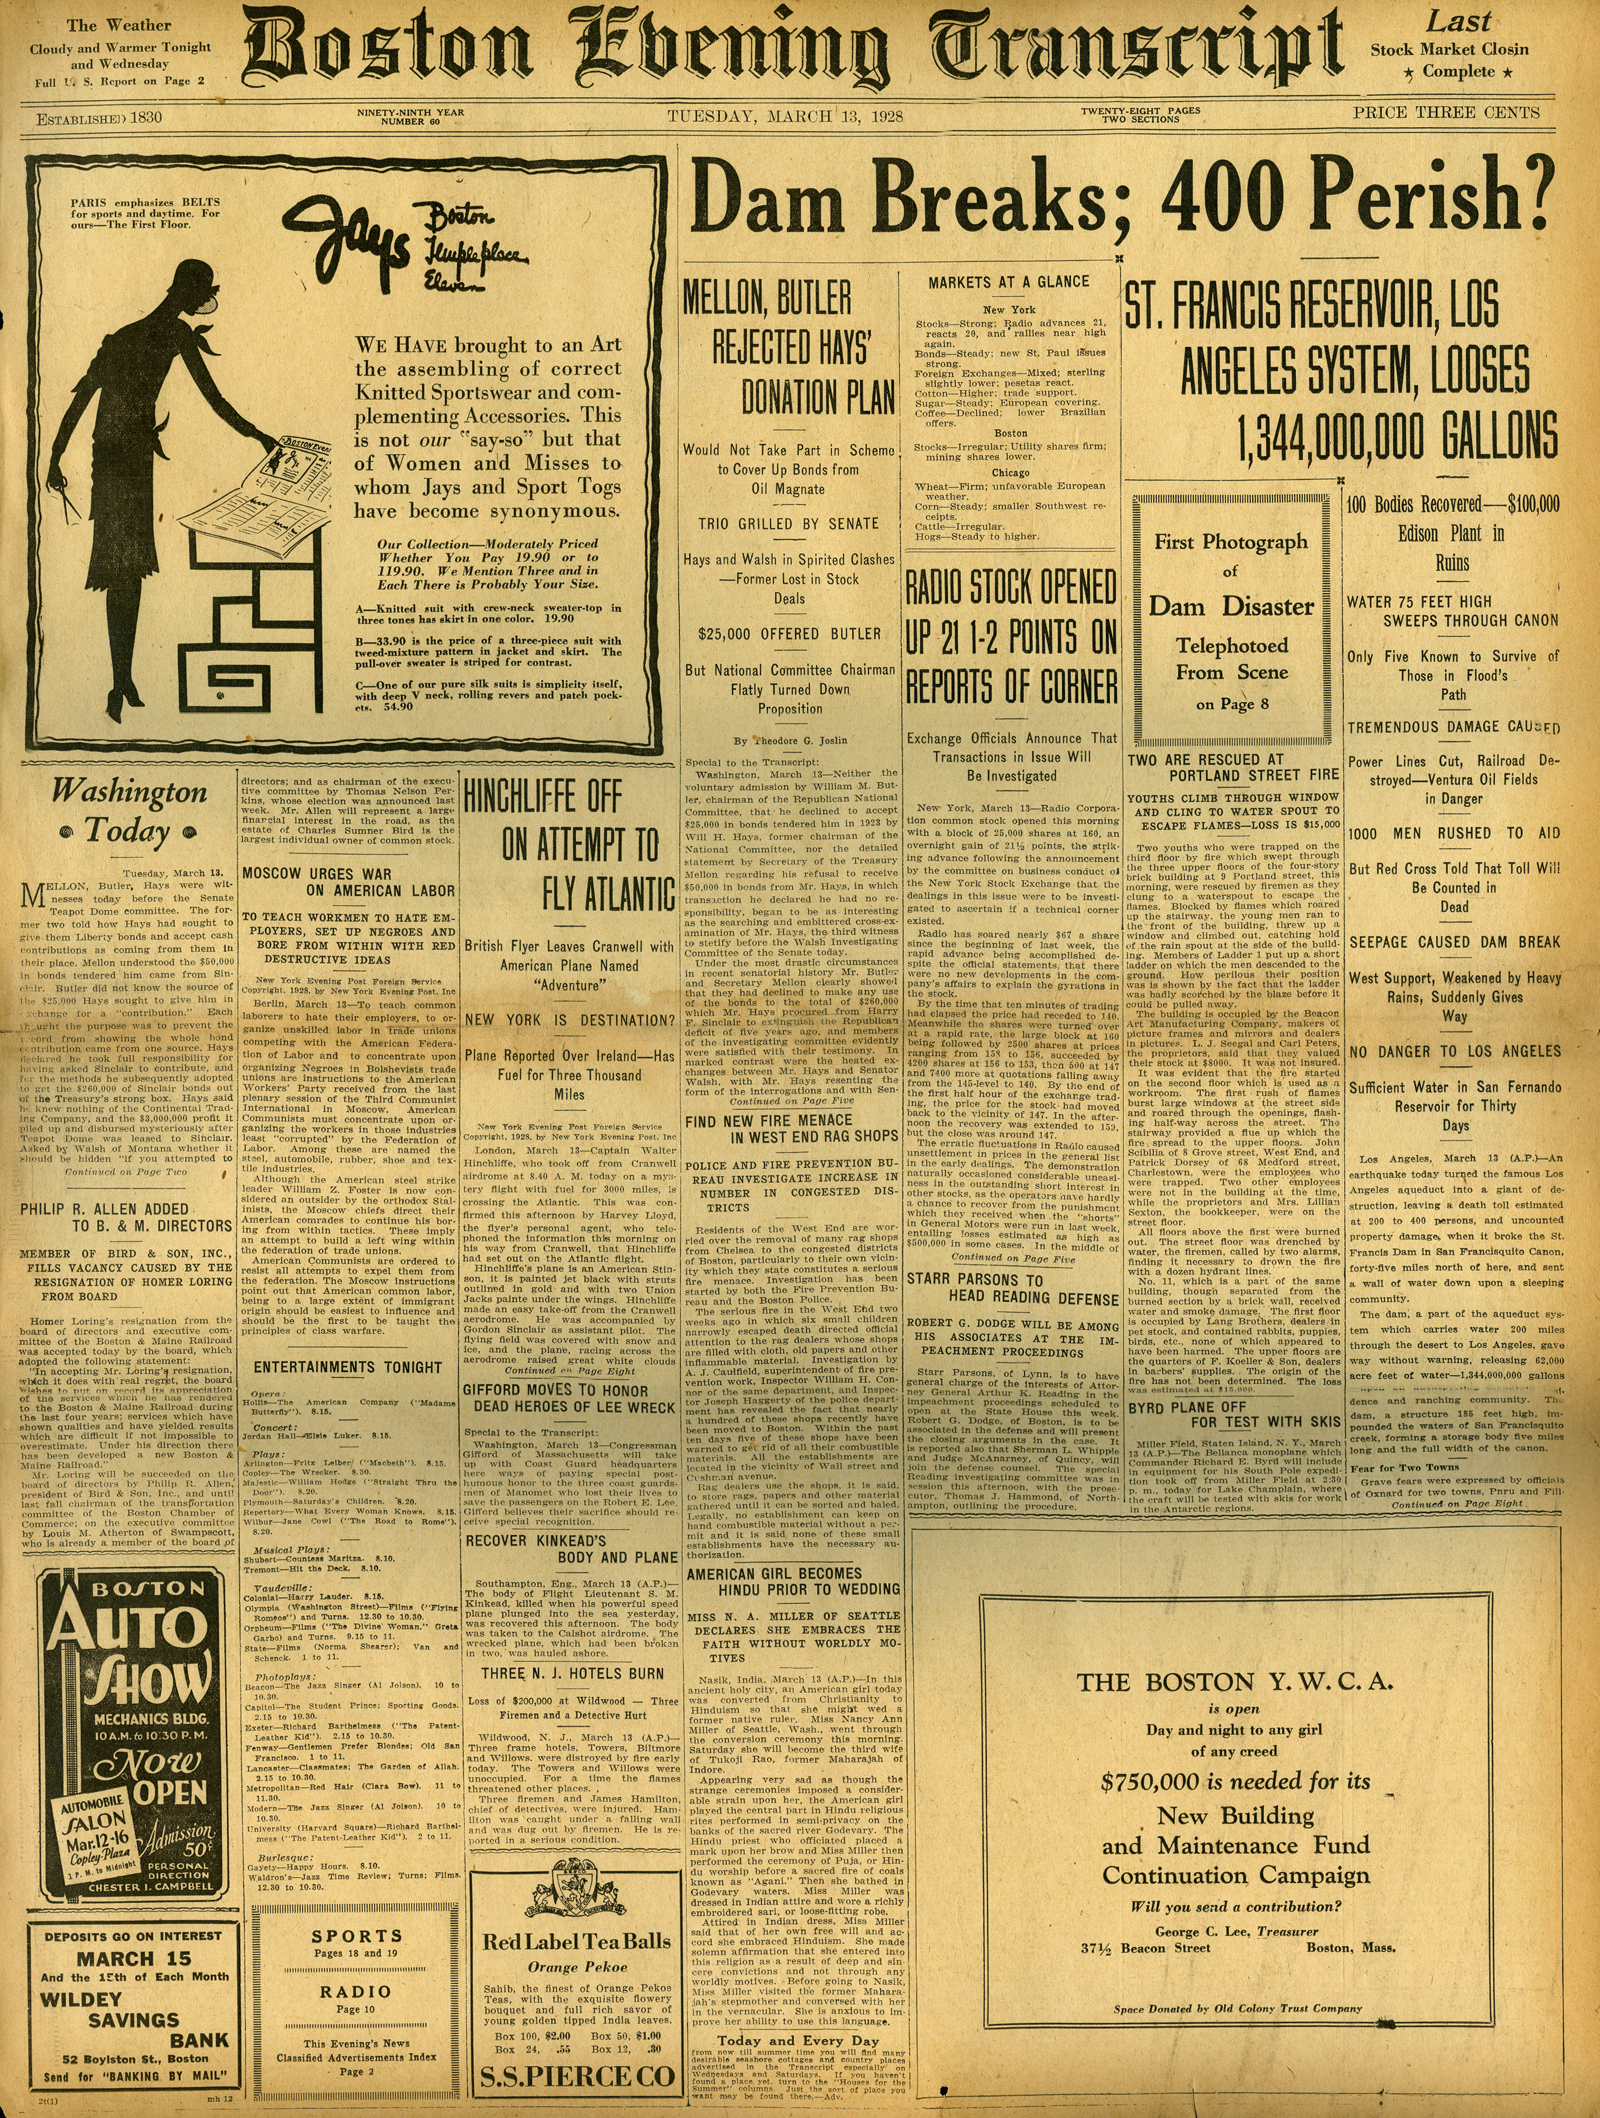 Newspapers of the St. Francis Dam Disaster.

BOSTON EVENING TRANSCRIPT (NEWSPAPER),

TUESDAY, MARCH 13, 1928